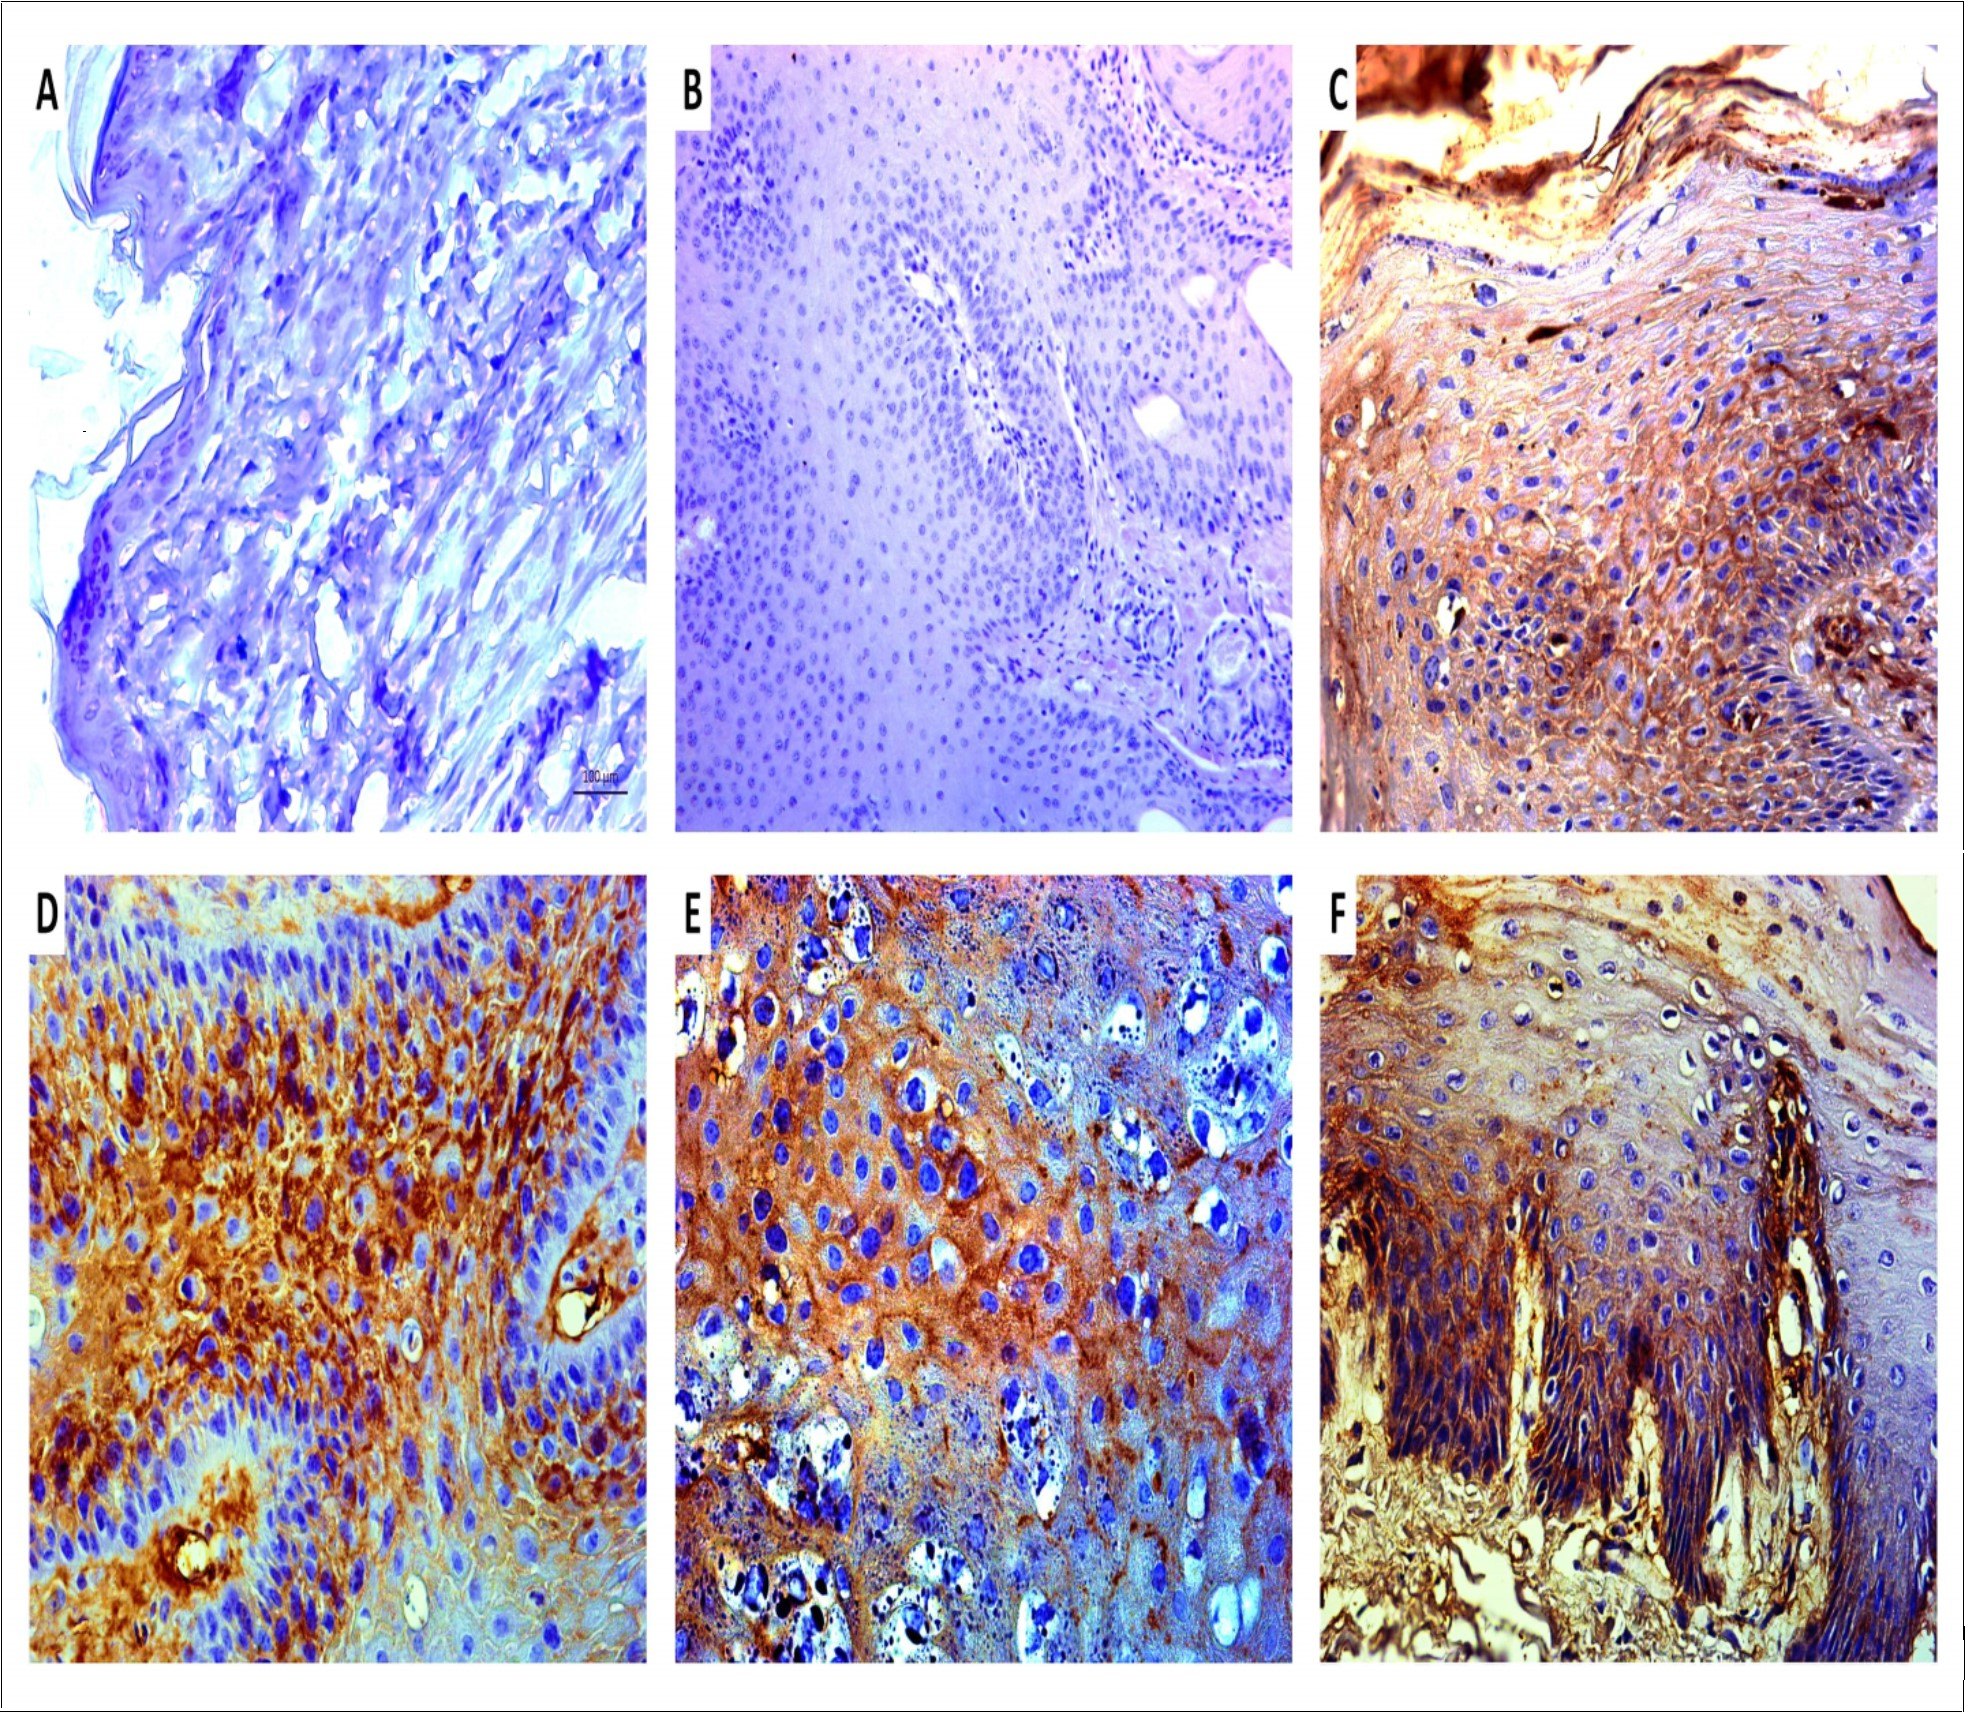  Immunodetection of BPV-1 E5 oncoprotein showing the absence of labeling in BPV-free normal skin (A), reinforcing the absence of virus infection in this tissue and, in negative control (B, cutaneous papilloma incubated exclusively with secondary antibody). The samples from cutaneous papilloma (C, papilloma 01), fibropapilloma (D and E – papilloma 02 and 03, respectively) and esophageal carcinoma (F) showed an evident expression of BPV-1 E5 oncoprotein, which was detected in both cytoplasm and plasmatic membrane, being in accordance with the protein biology, since the E5 is a hydrophobic transmembrane protein. Images obtained using objectives of 5X (B), 10X (A) and 20X (C-F).